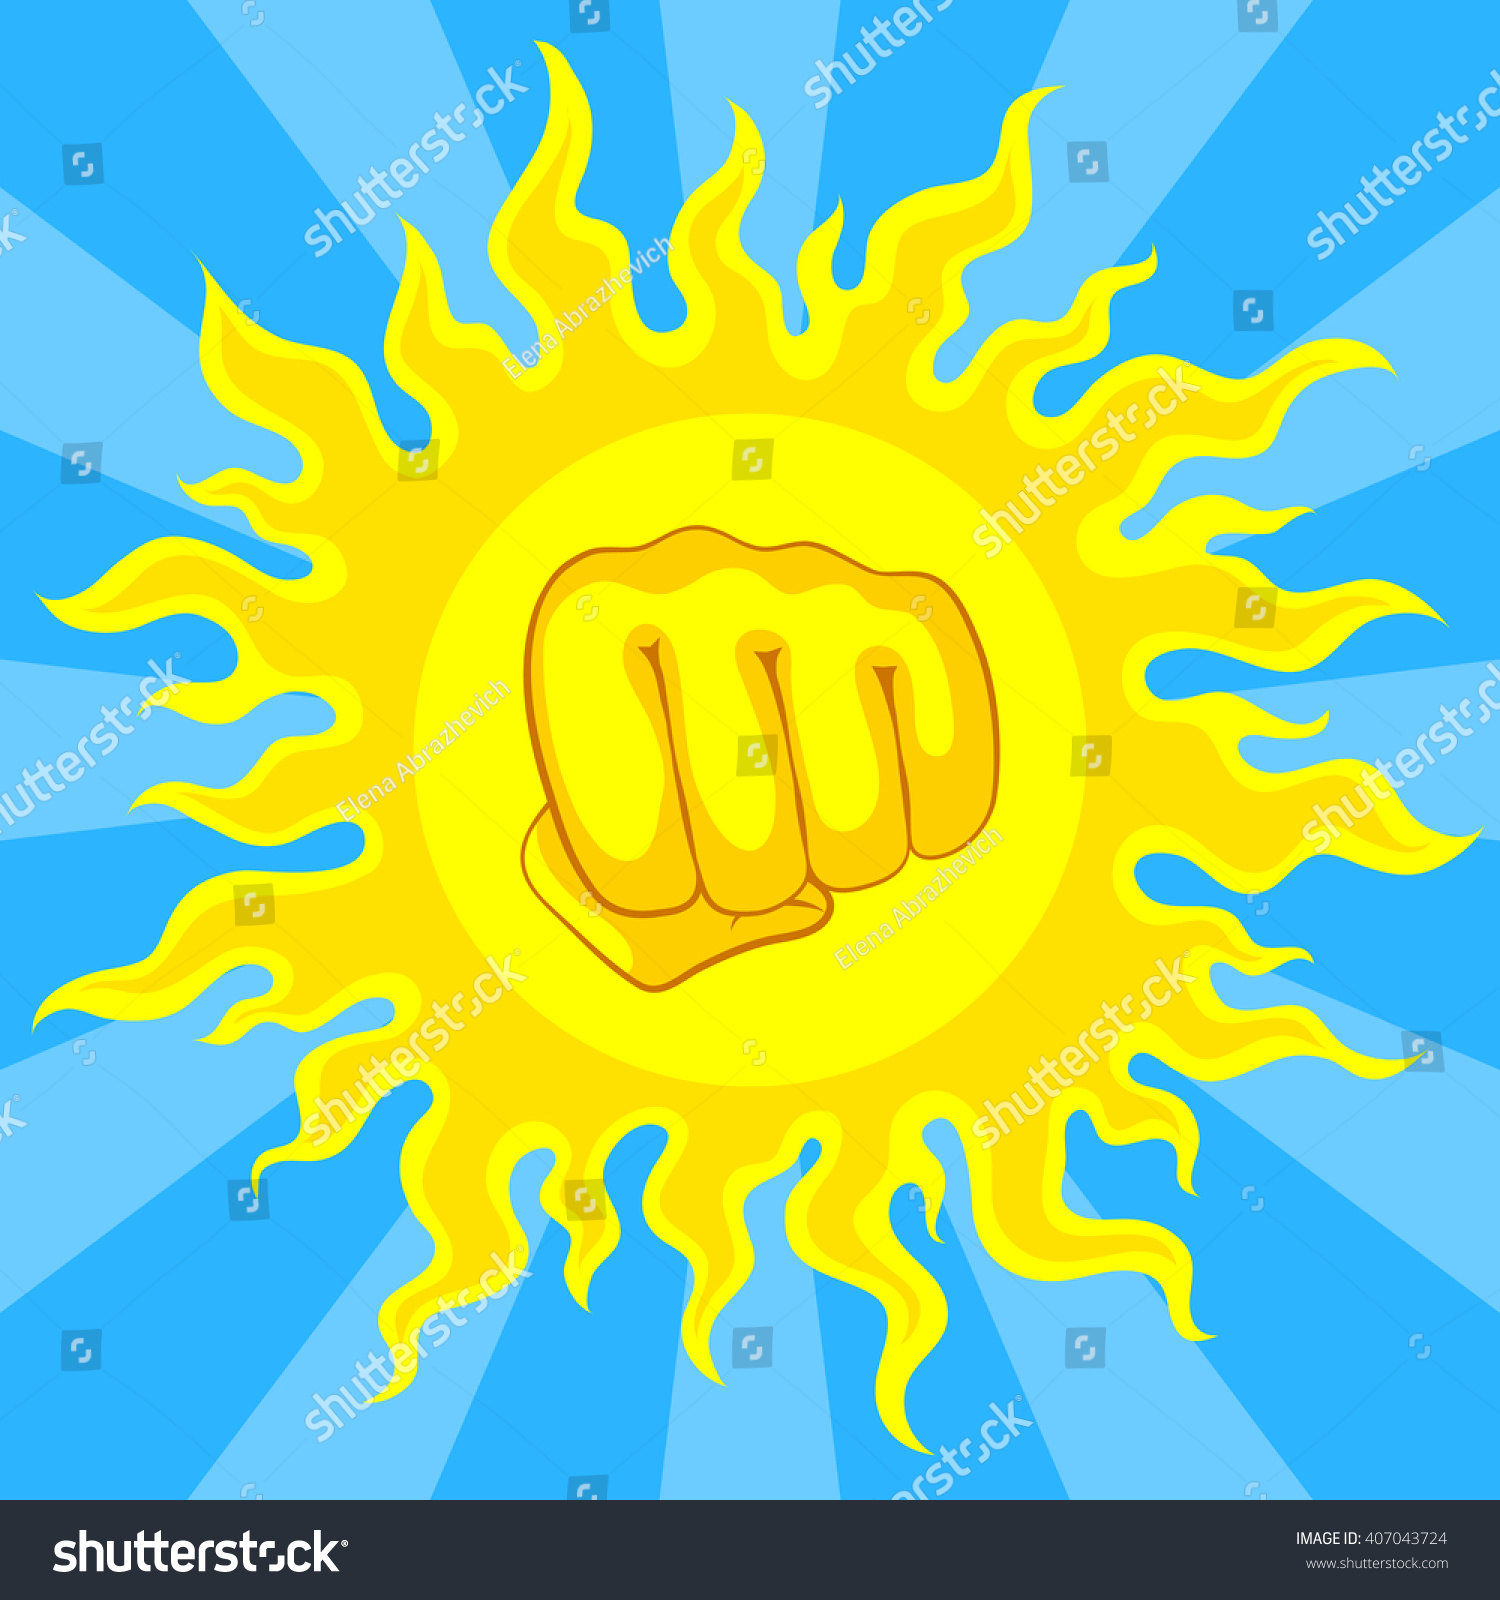 Bright yellow sun and fist in the middle, with sunrays on blue sky. Risk of sunstroke and heatstroke at hot season #407043724